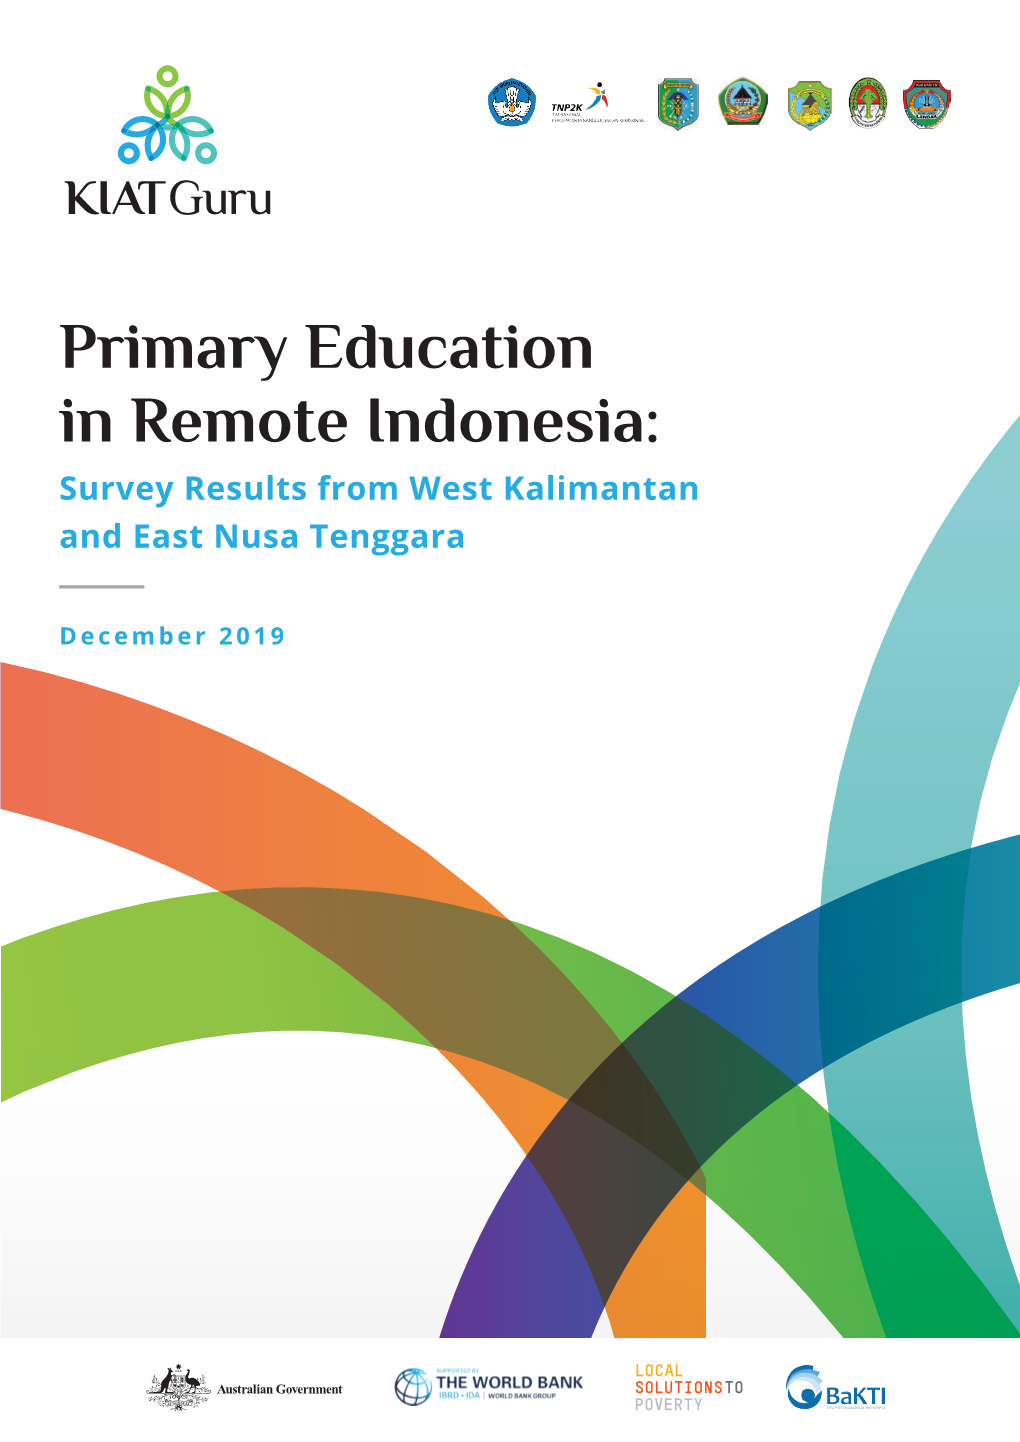 Primary Education in Remote Indonesia: Survey Results from West Kalimantan and East Nusa Tenggara